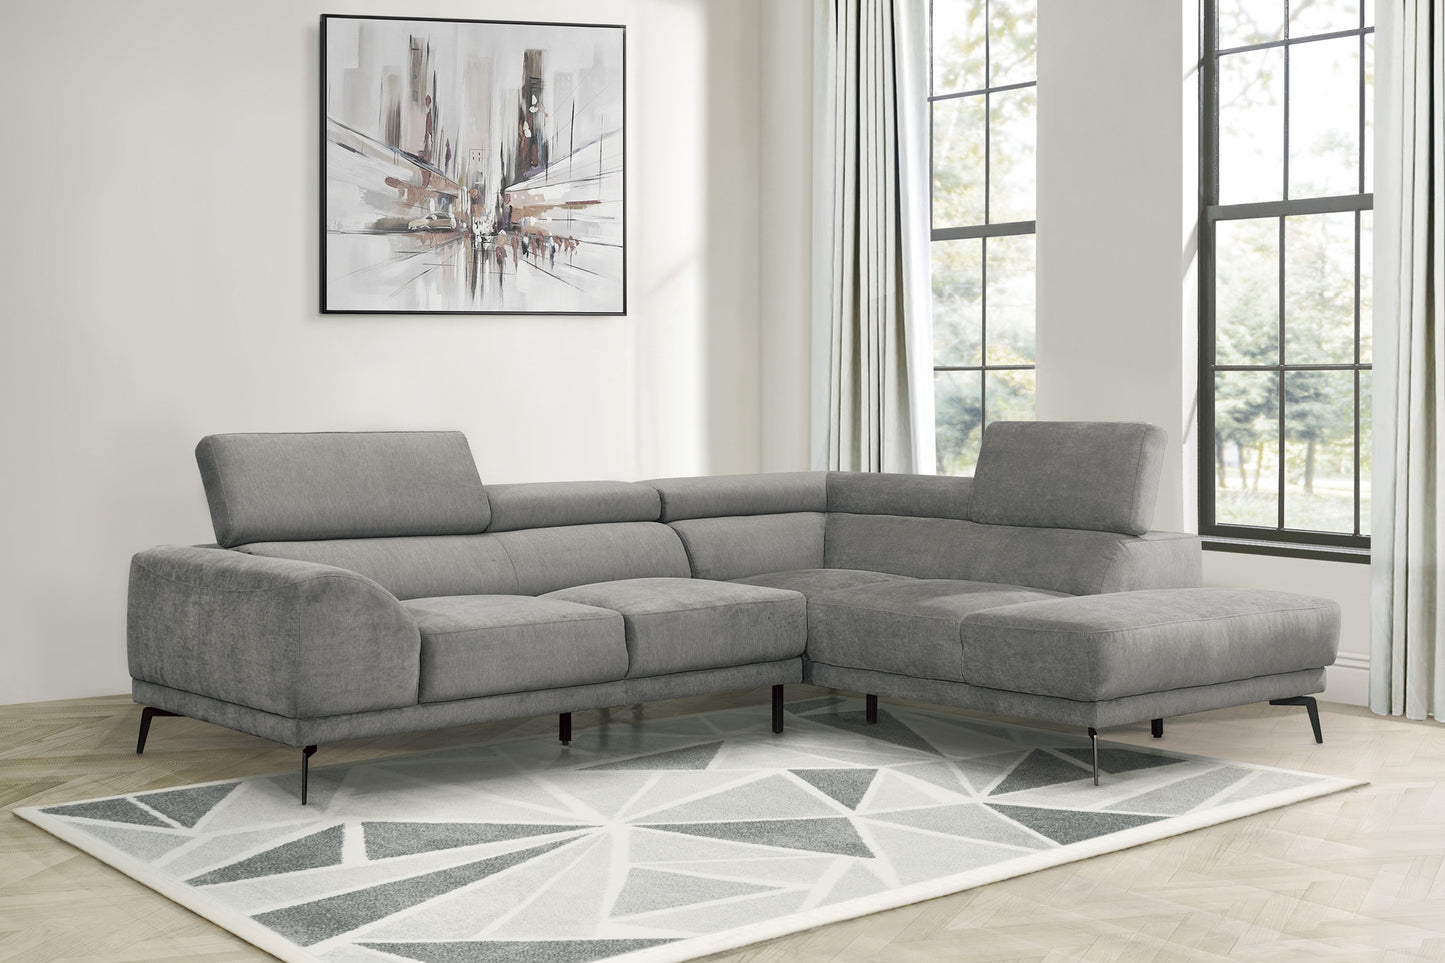 Medora Sectional RAF only GREY CLEARANCE